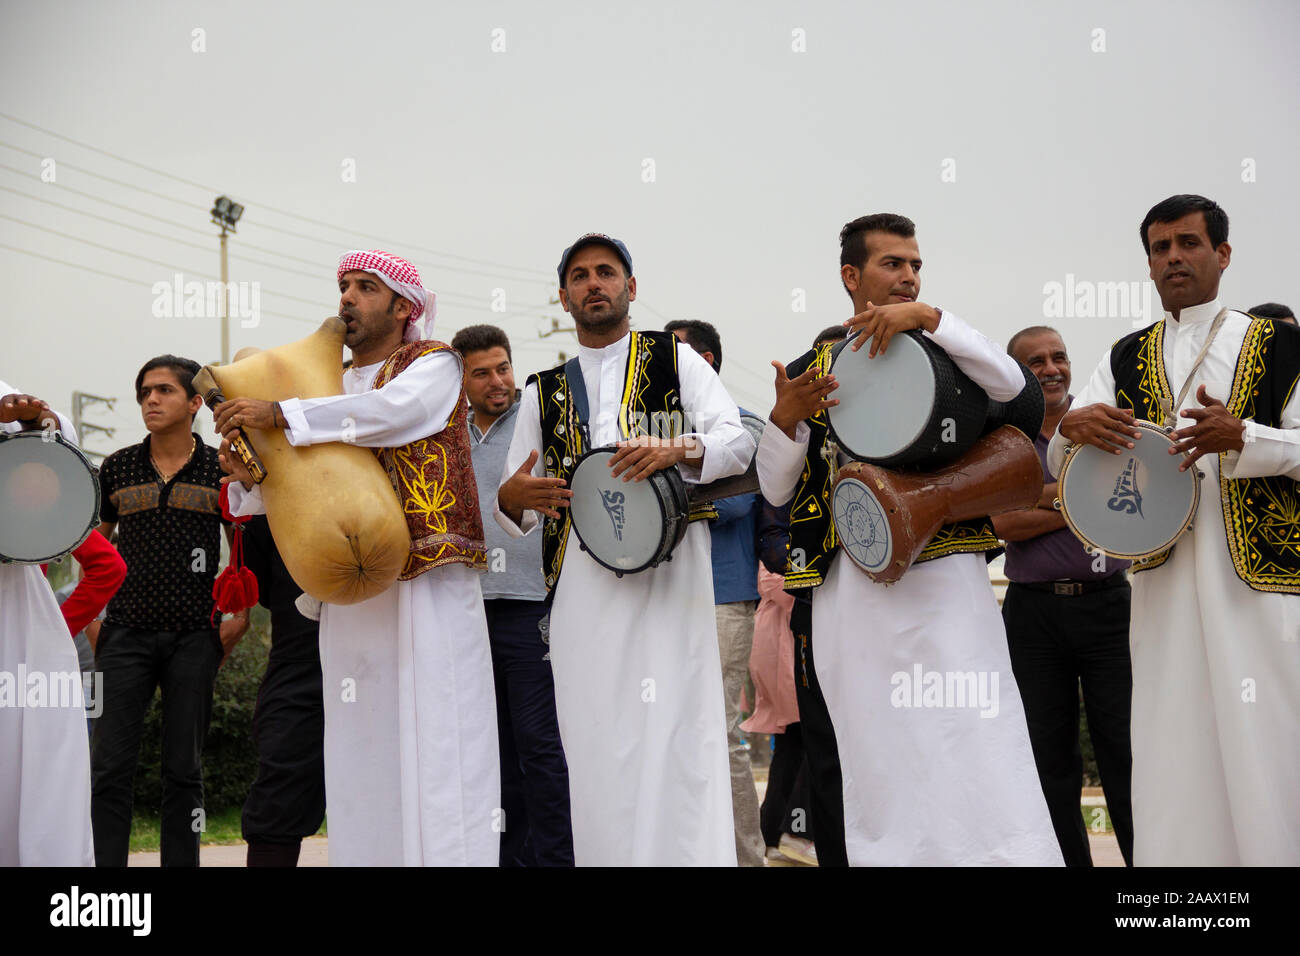 A coastal city south of Iran with a traditional mixed culture of Persians and Arabs. Here a wedding music band is playing folk music for the ceremony. Stock Photo